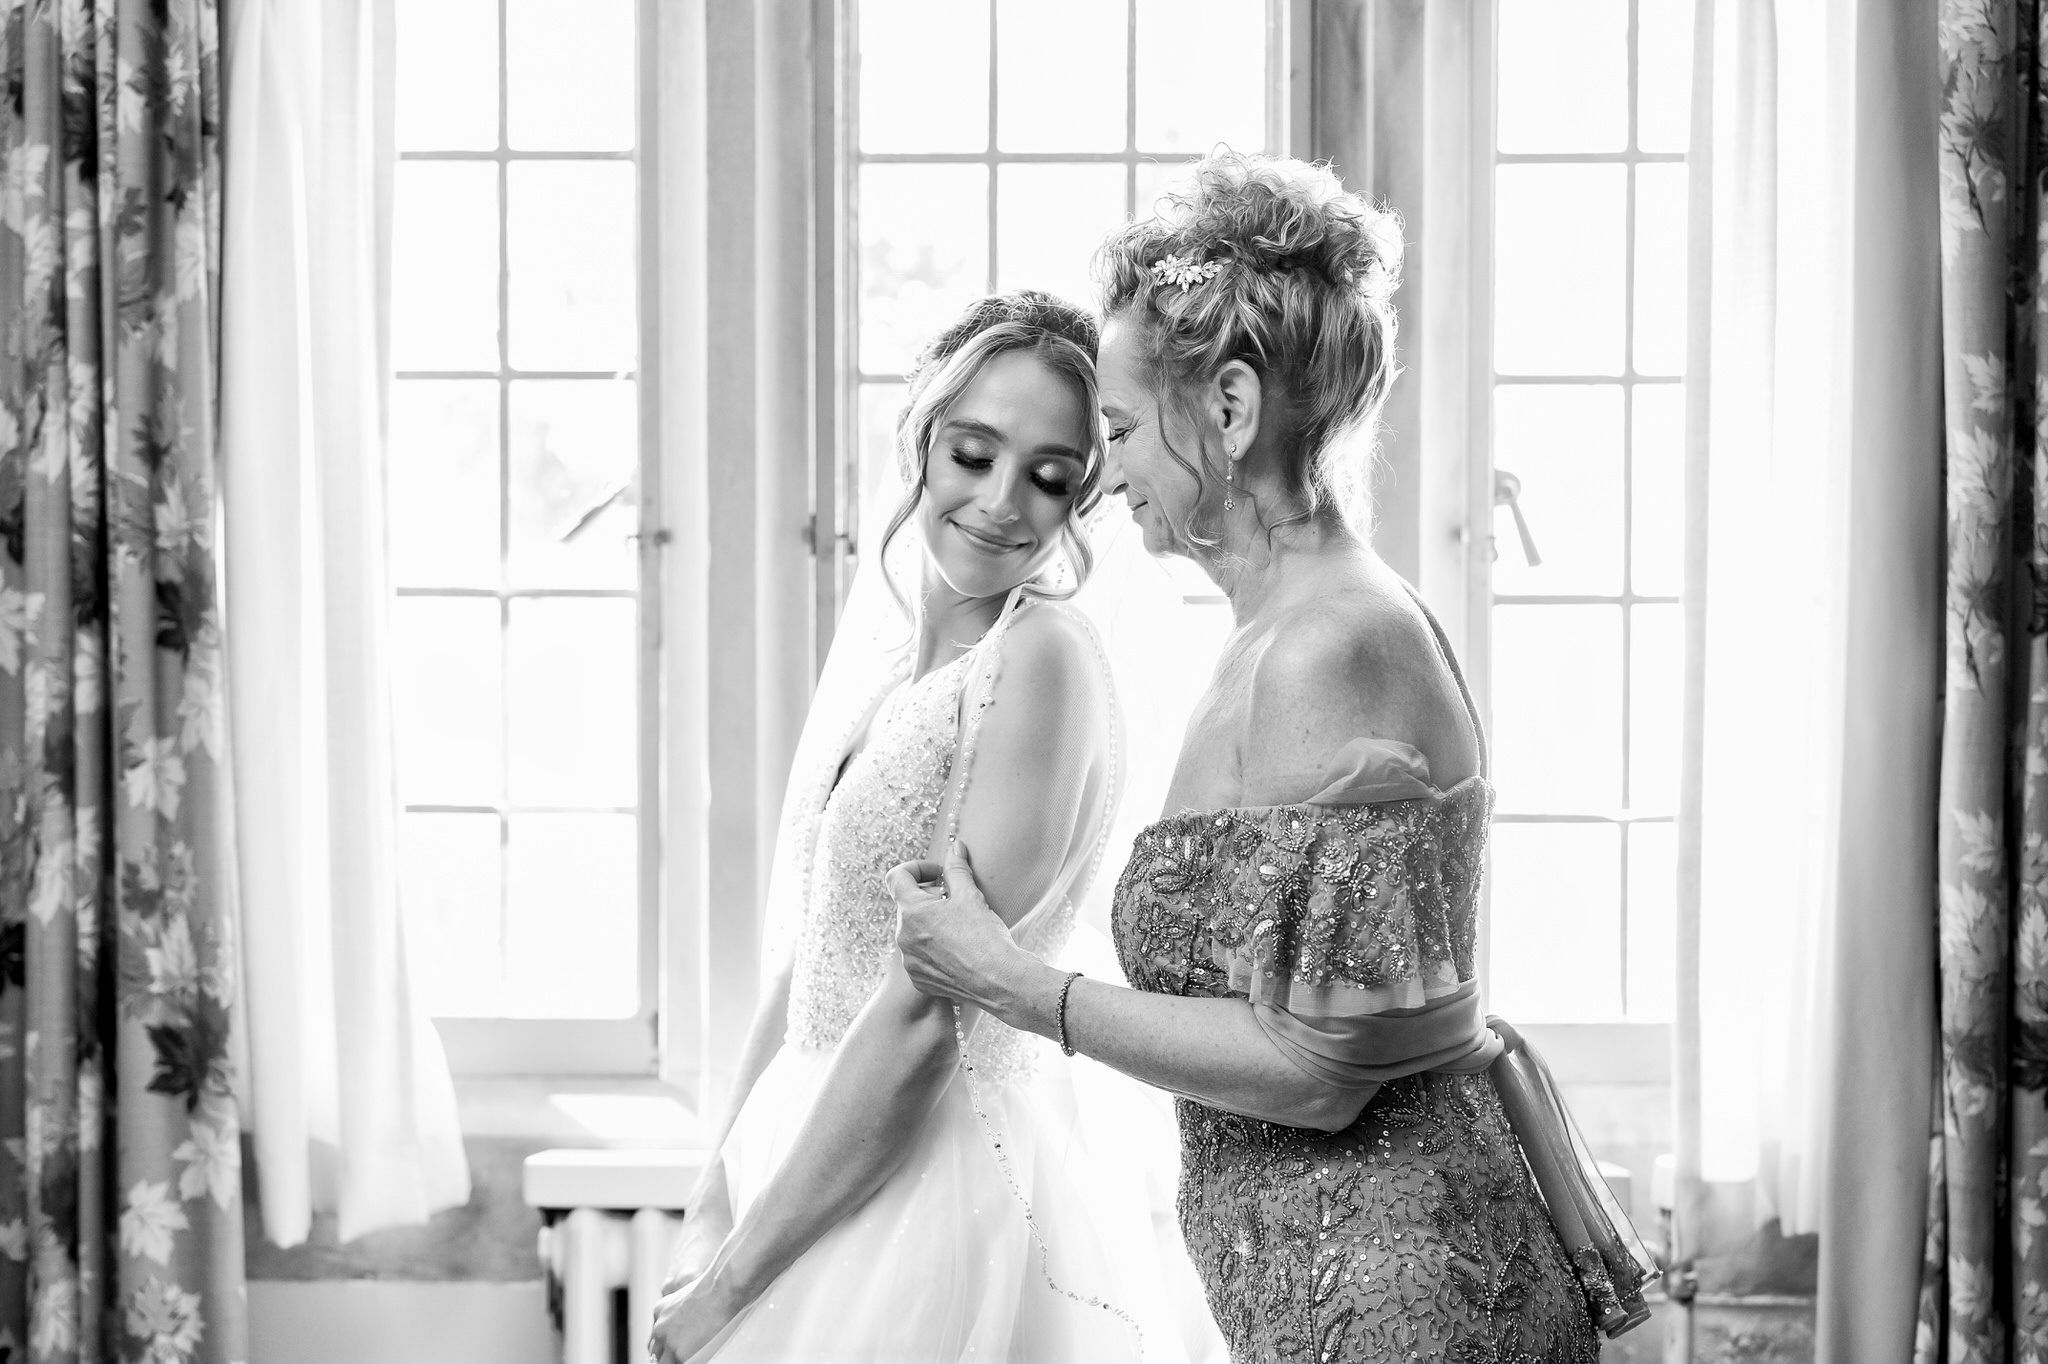 Mom and bride share a quiet moment during her prep before her wedding at Meadowbrook Hall.